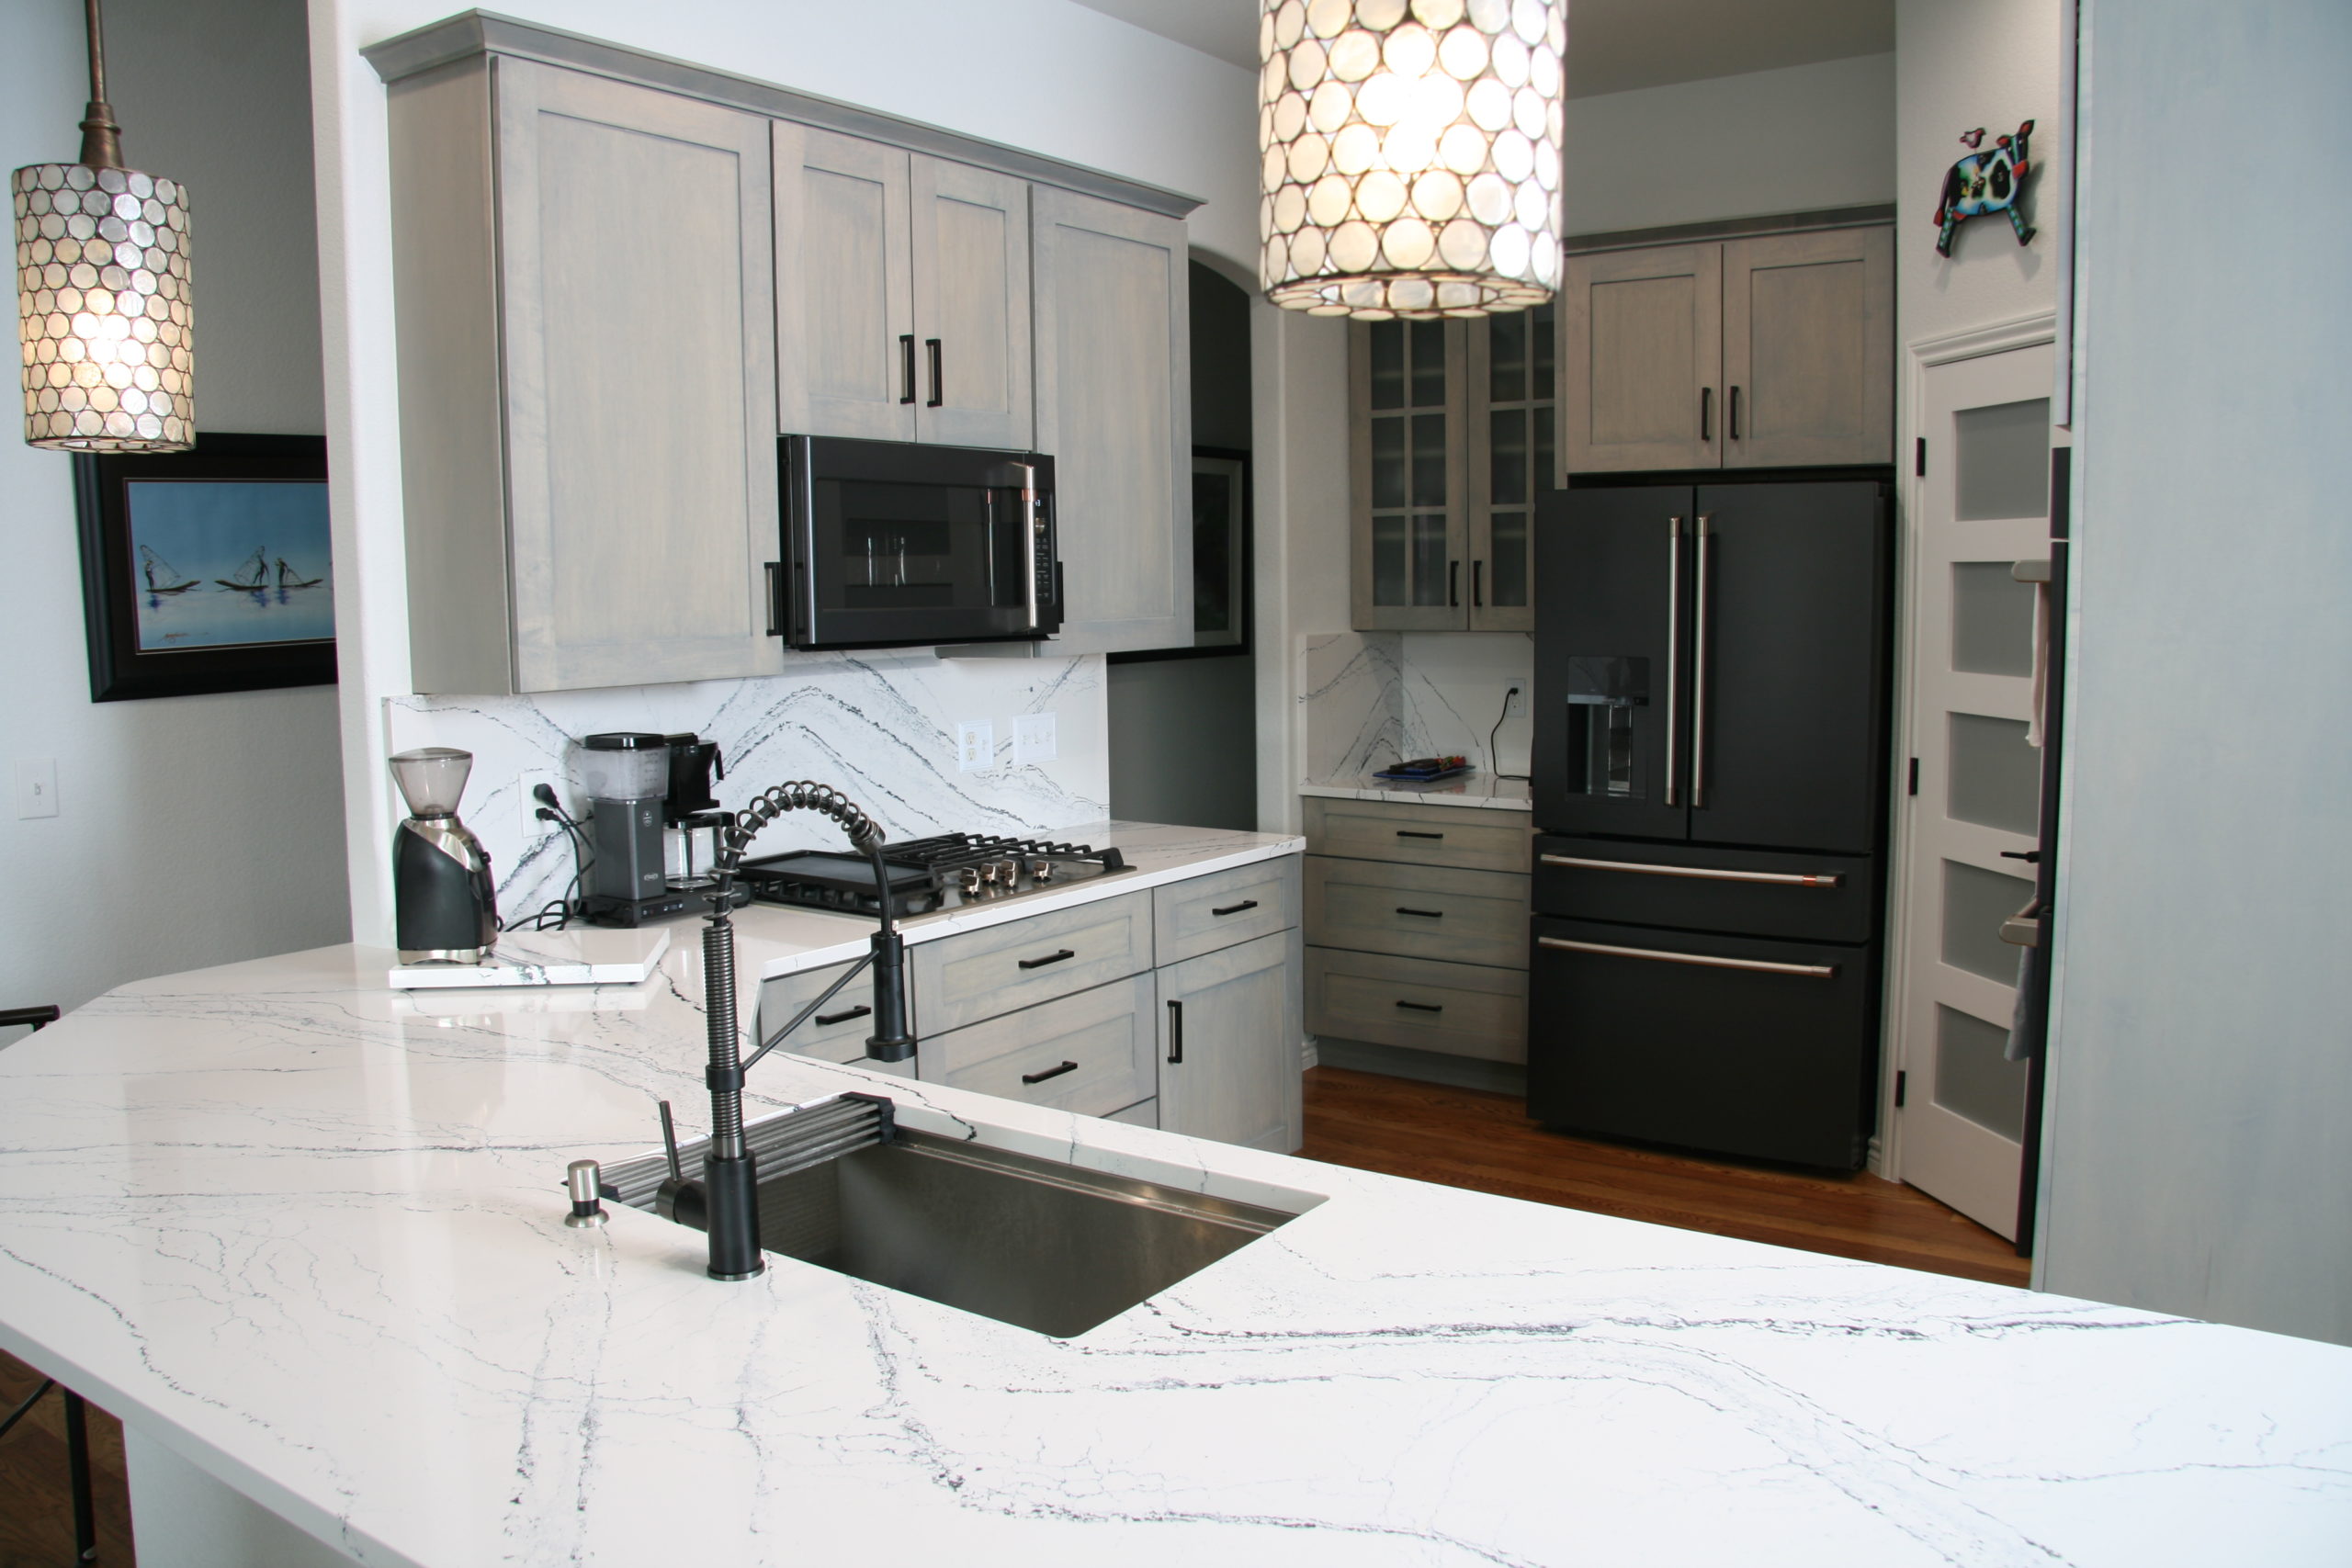 Boulder kitchen remodel with white countertops